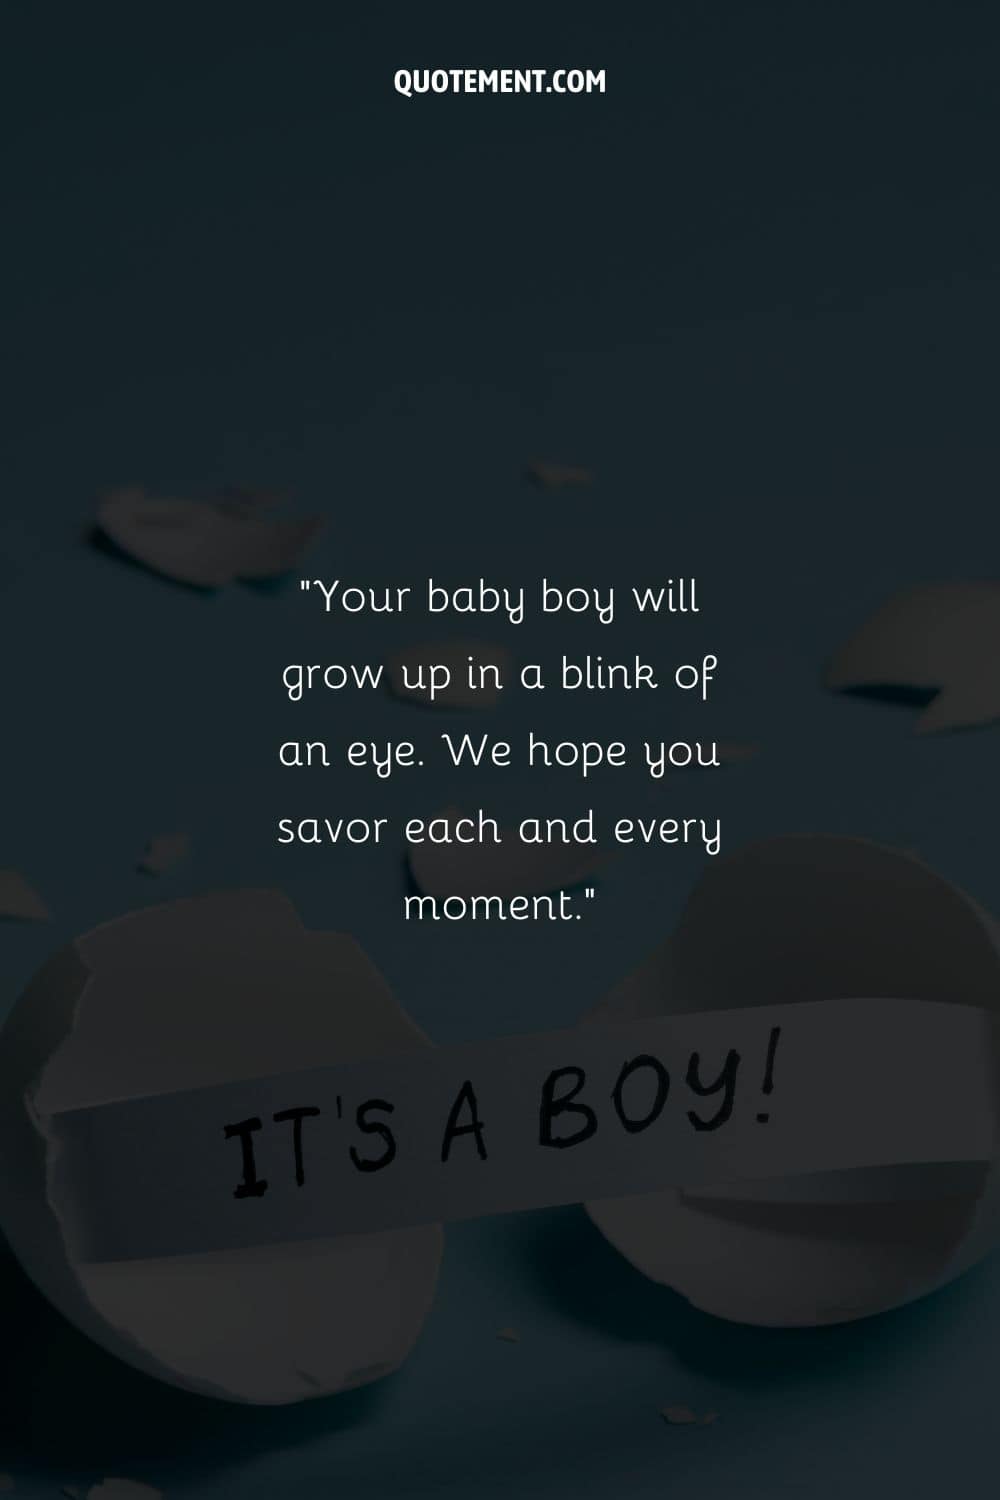 Your baby boy will grow up in a blink of an eye. We hope you savor each and every moment